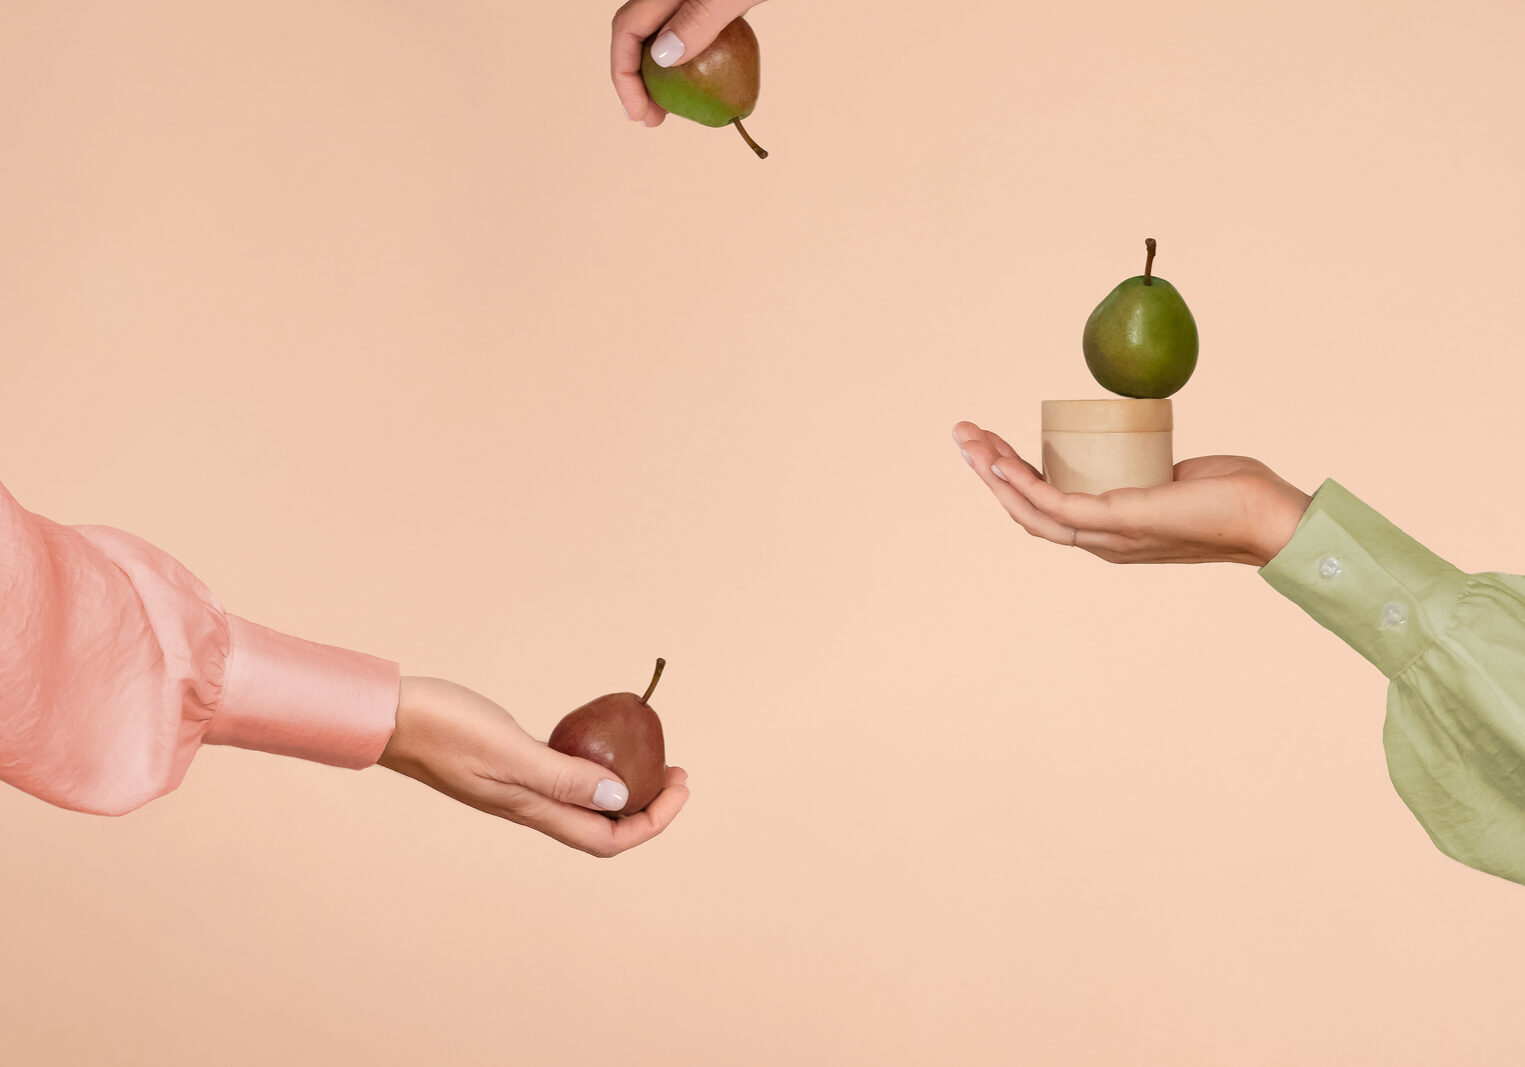 Product photo with a woman model presenting pears and a jar of cosmetic cream styled by Jenni Joanna Visuals.